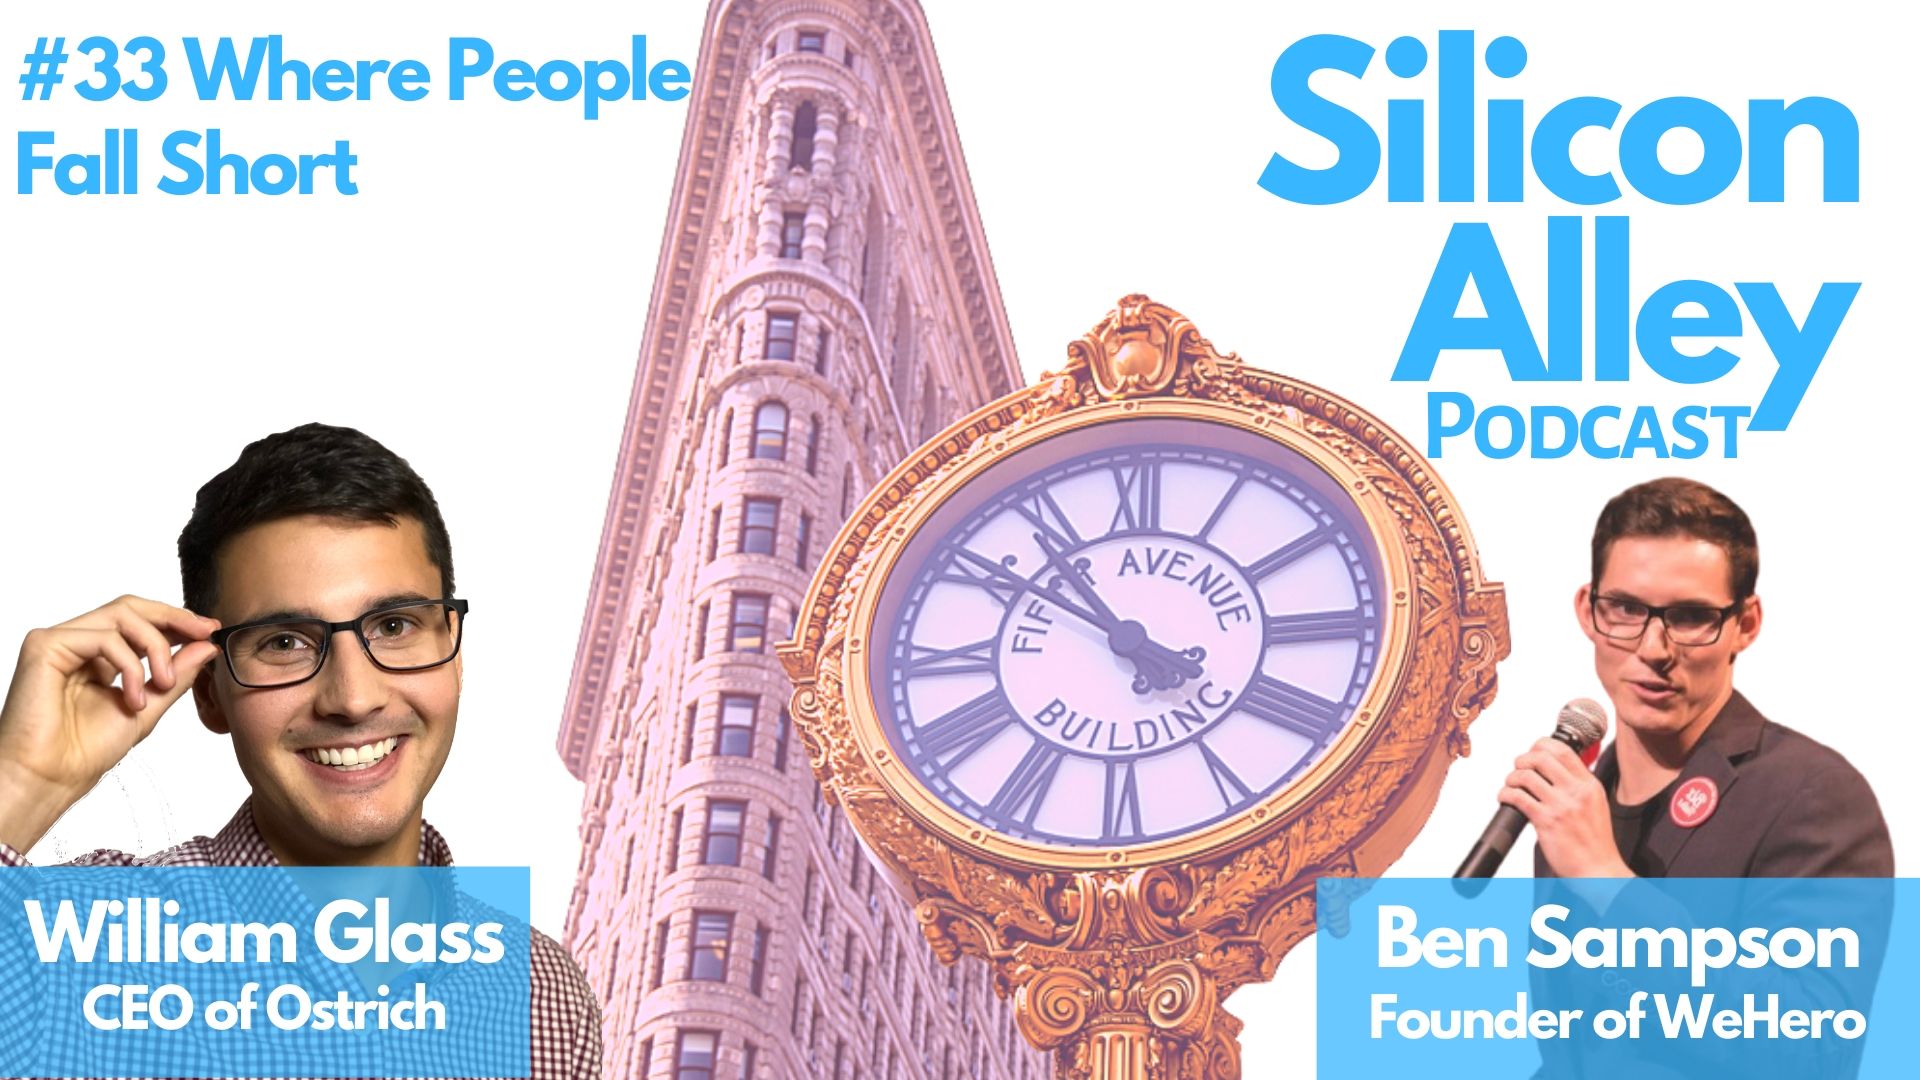 #33 Silicon Alley Podcast Episode - Where People Fall Short with Ben Sampson Founder of WeHero